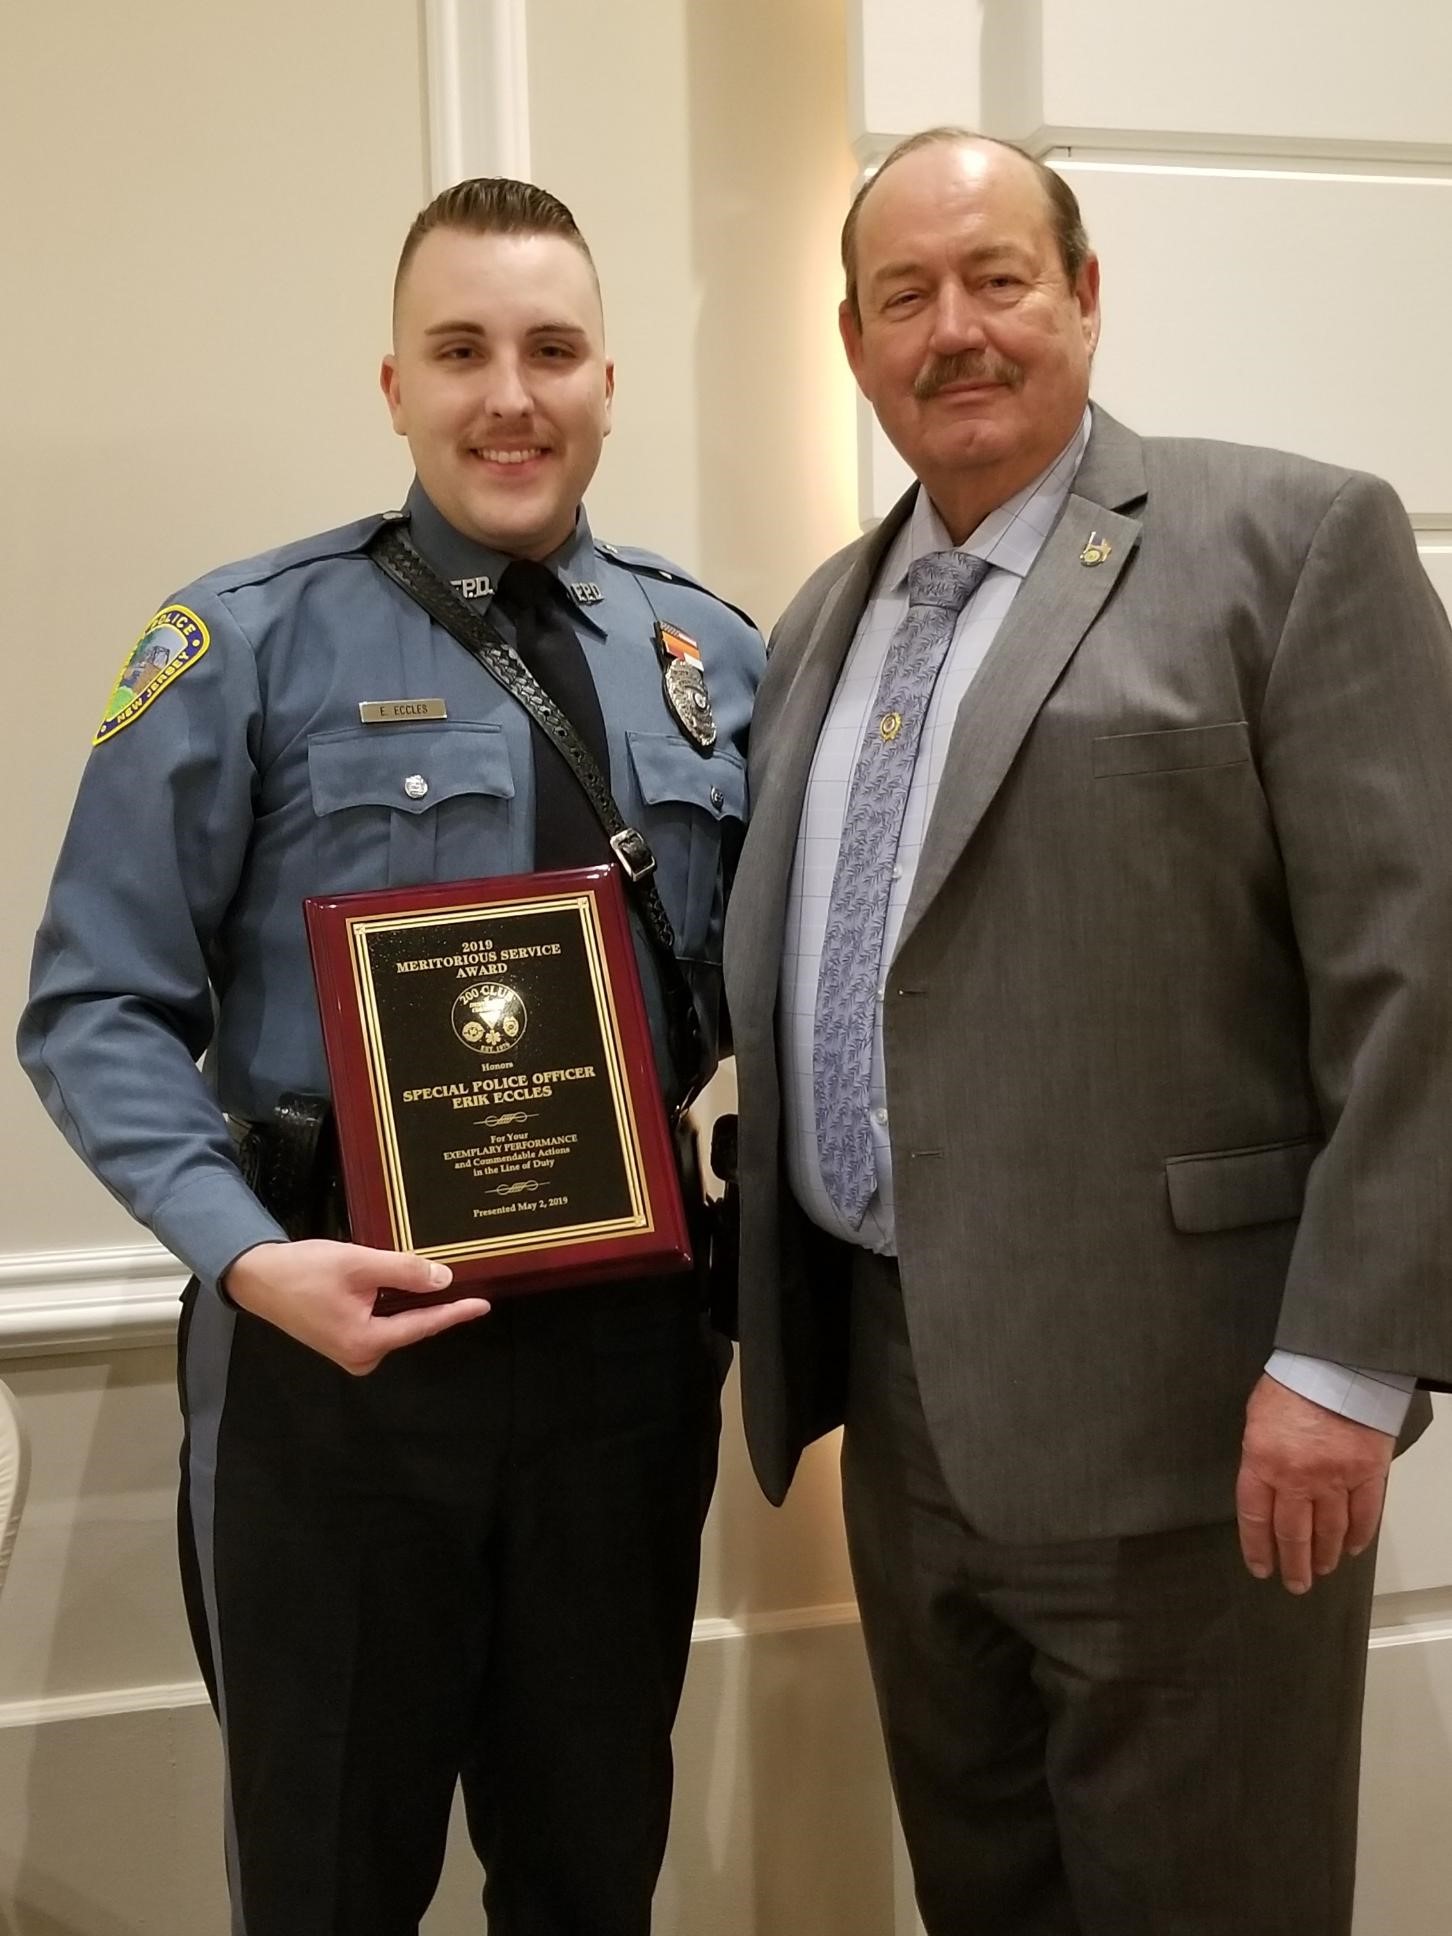 Frenchtown Police Officer Presented With Life Saving Award